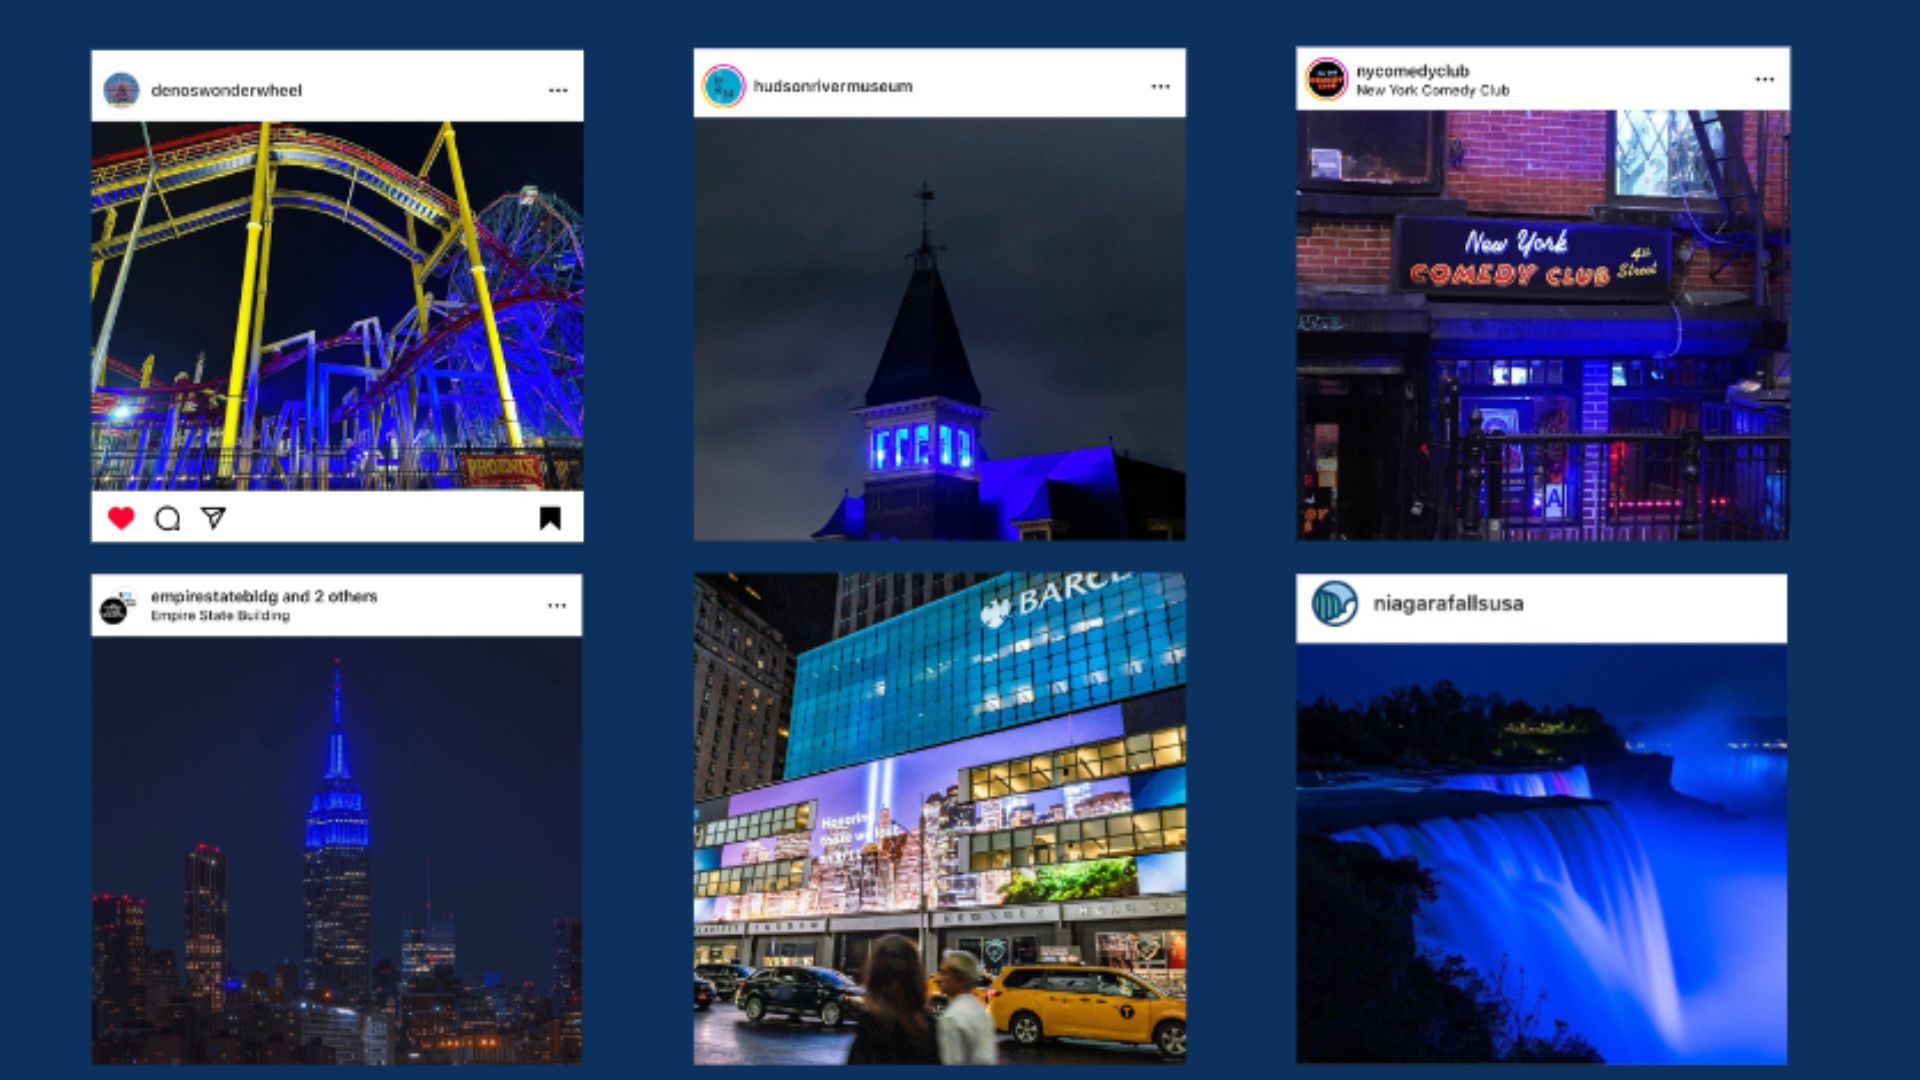 Six images of buildings and landmarks illuminated in blue